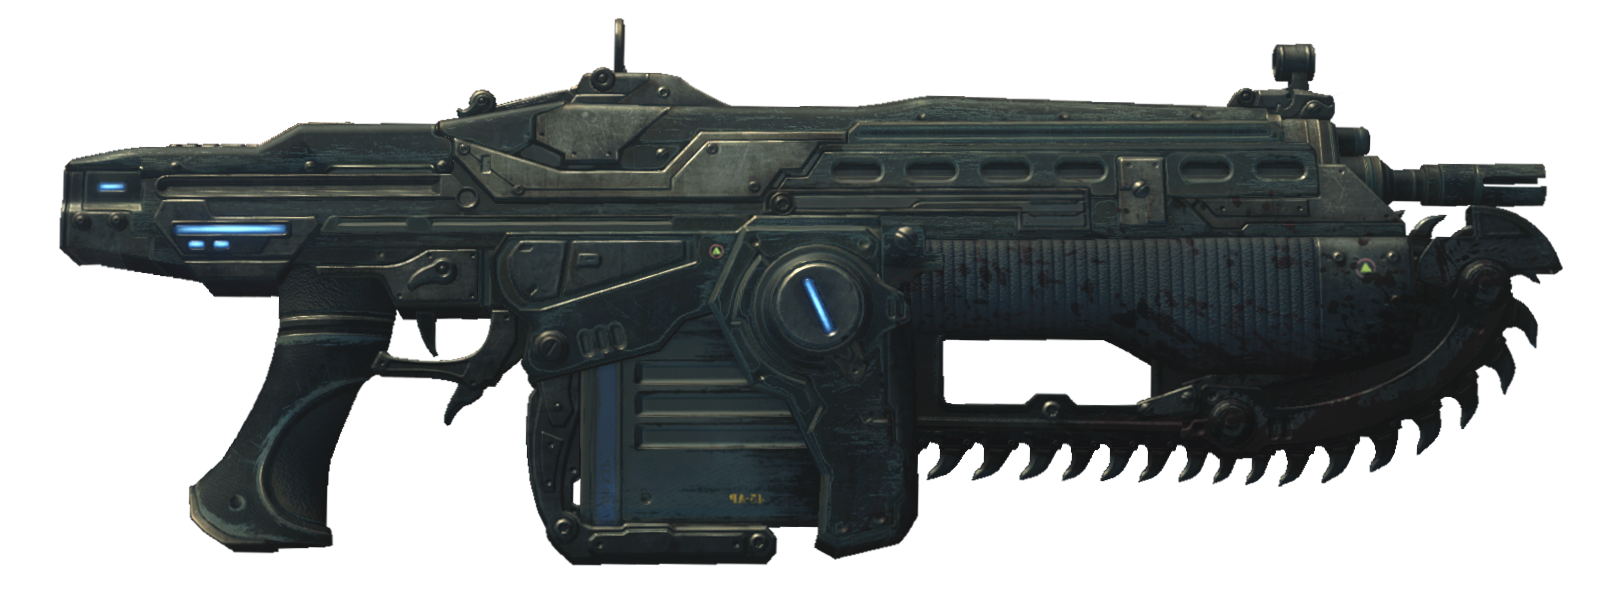 In Defense of the 'Gears of War' Chainsaw Gun